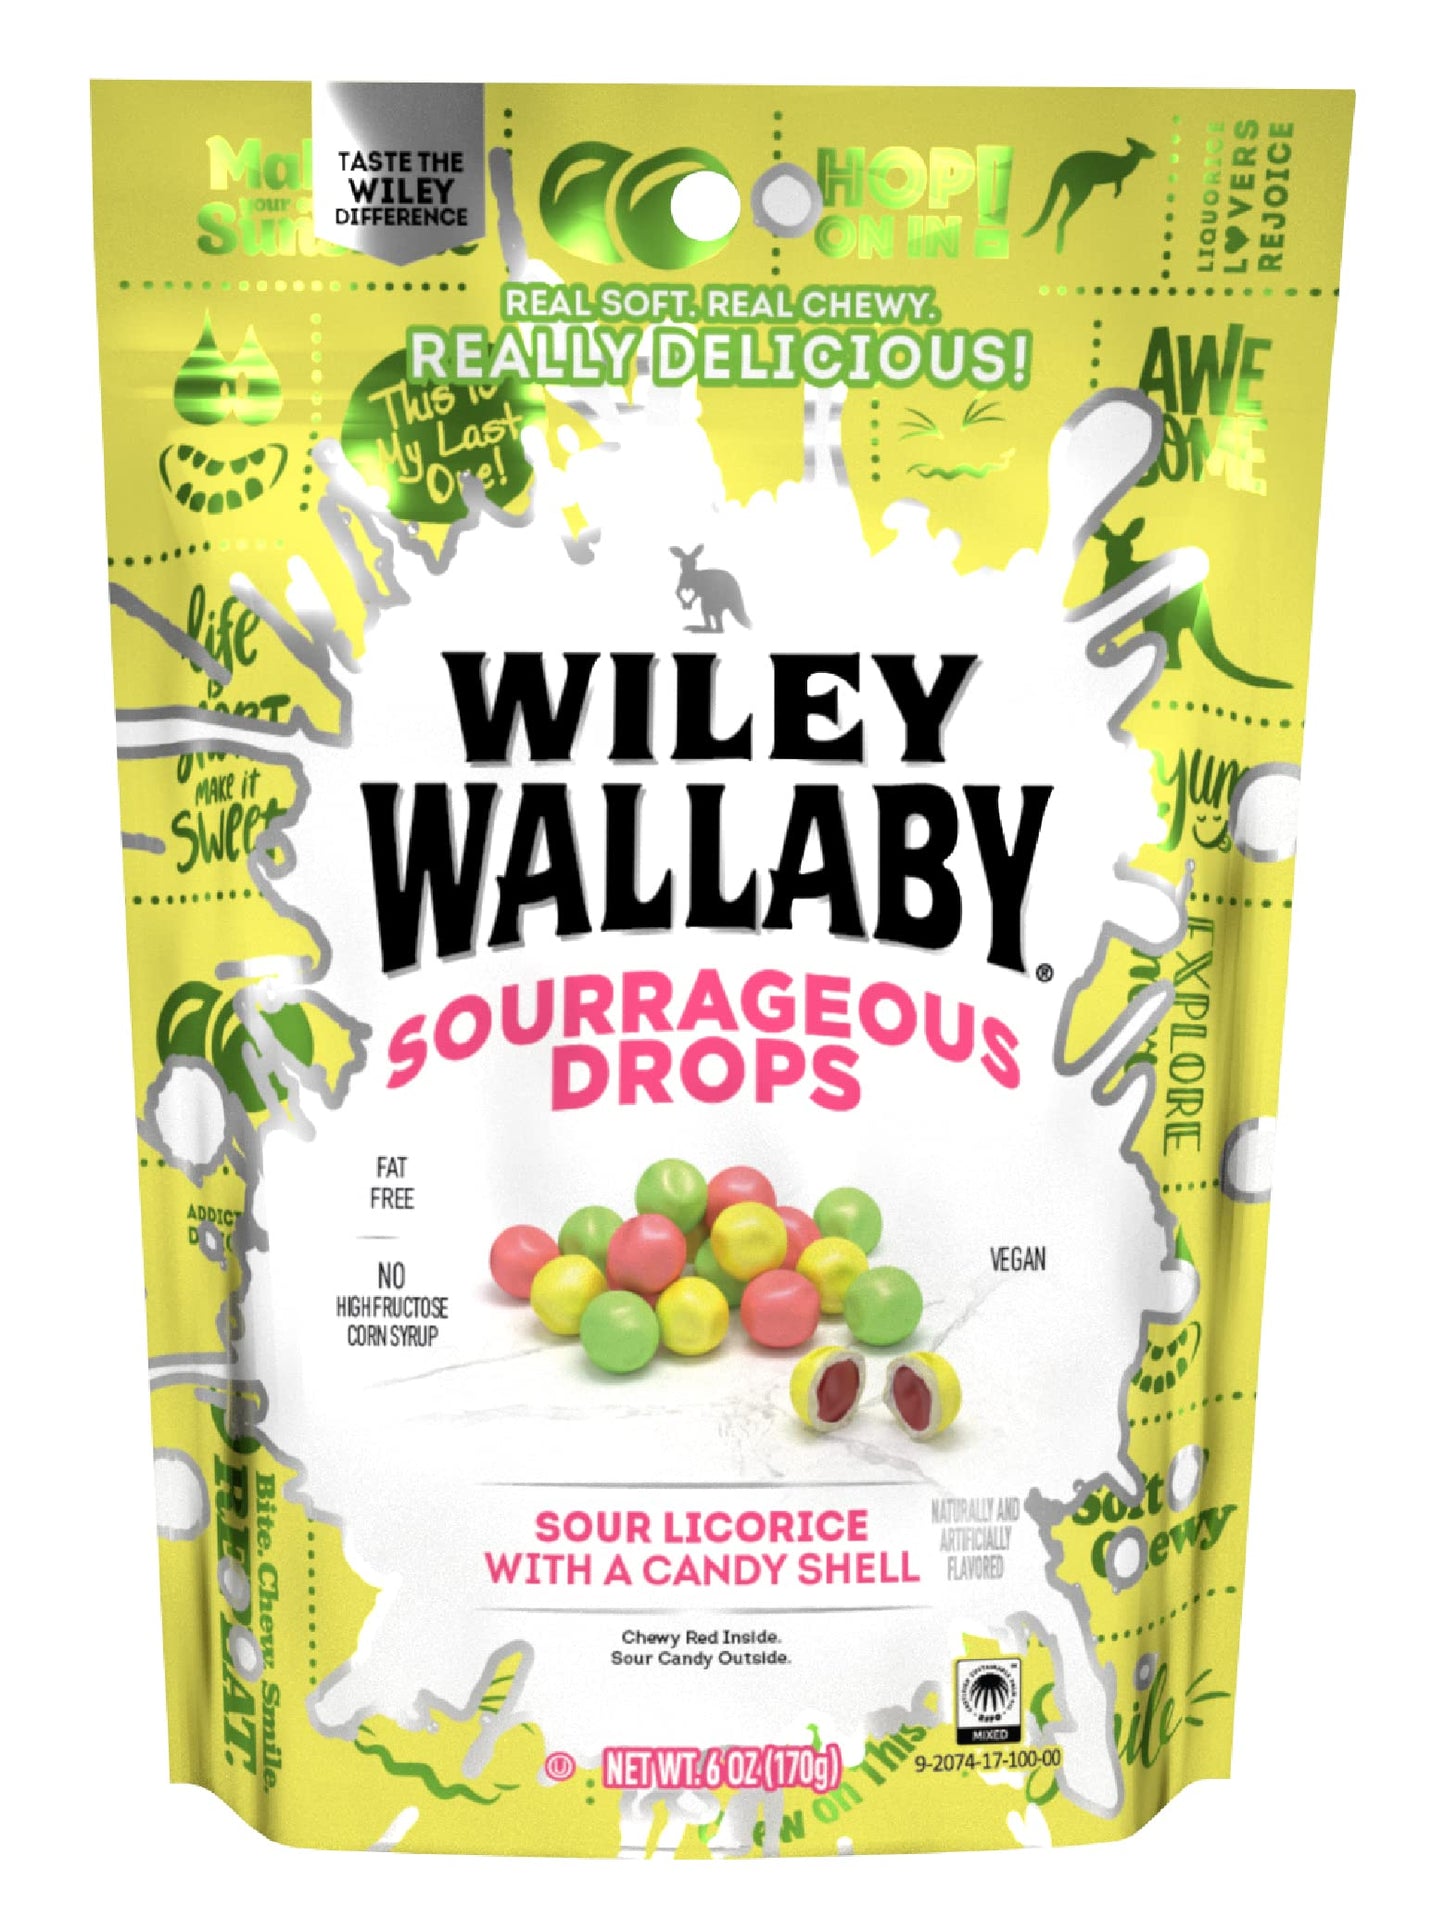 Wiley Wallaby Drops Original Fruits Gourmet Australian Style Soft & Chewy Licorice Candy_Parent in 1,2 & 3 packs